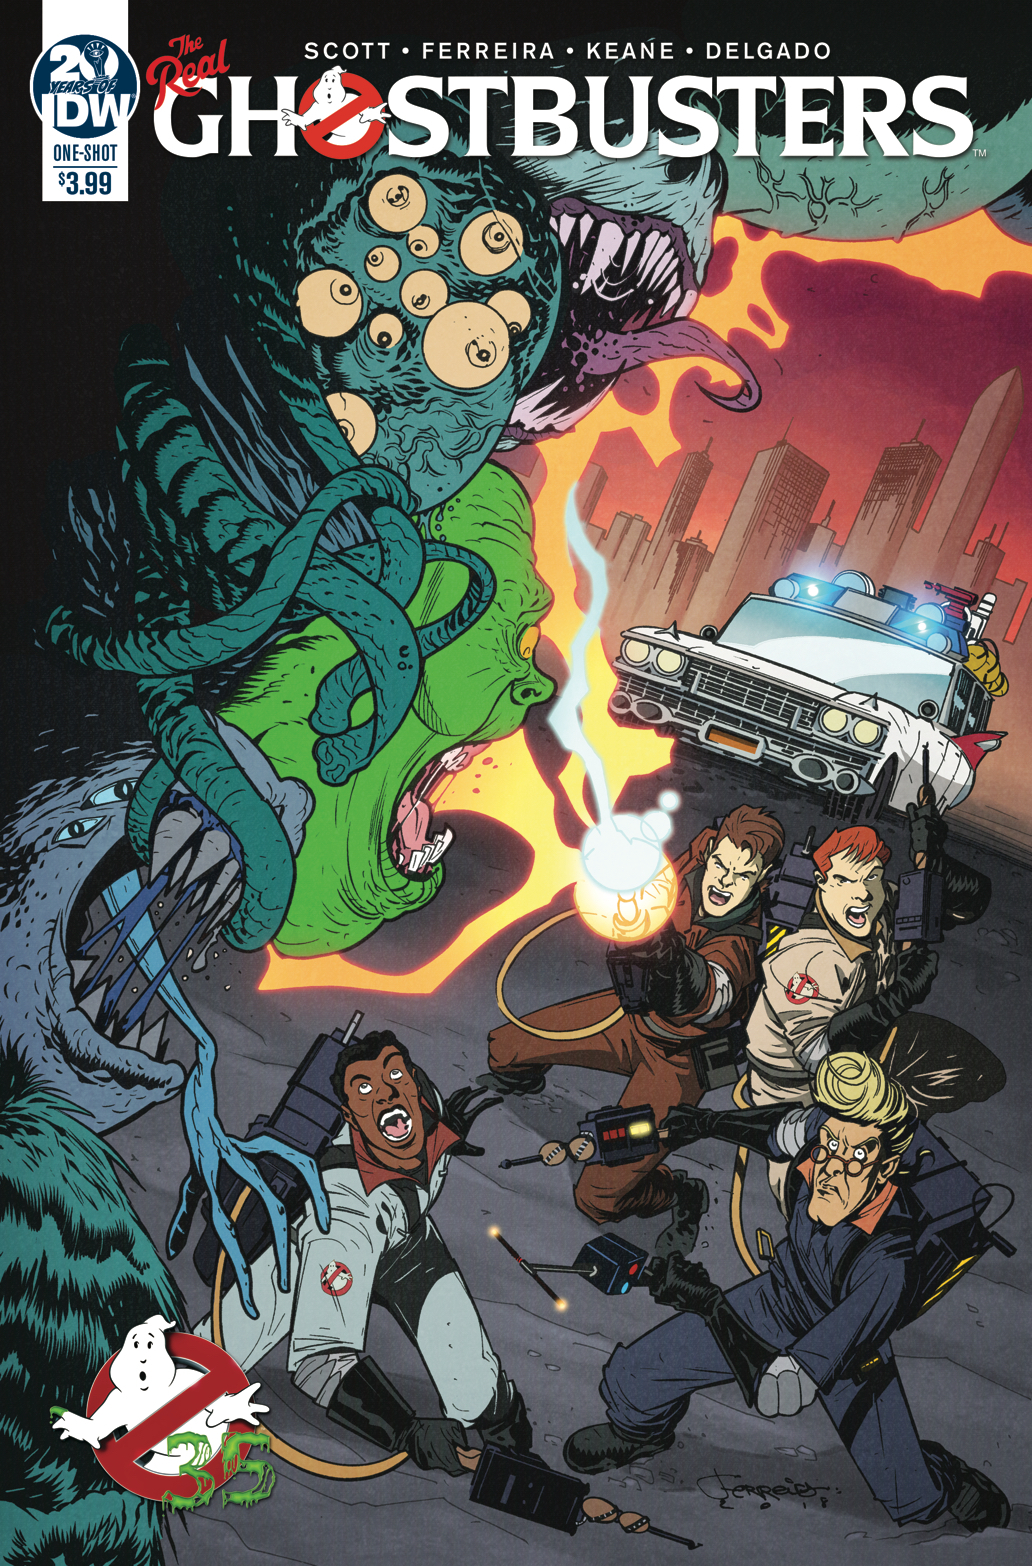 GHOSTBUSTERS 35TH ANNIV REAL GHOSTBUSTERS FERREIRA